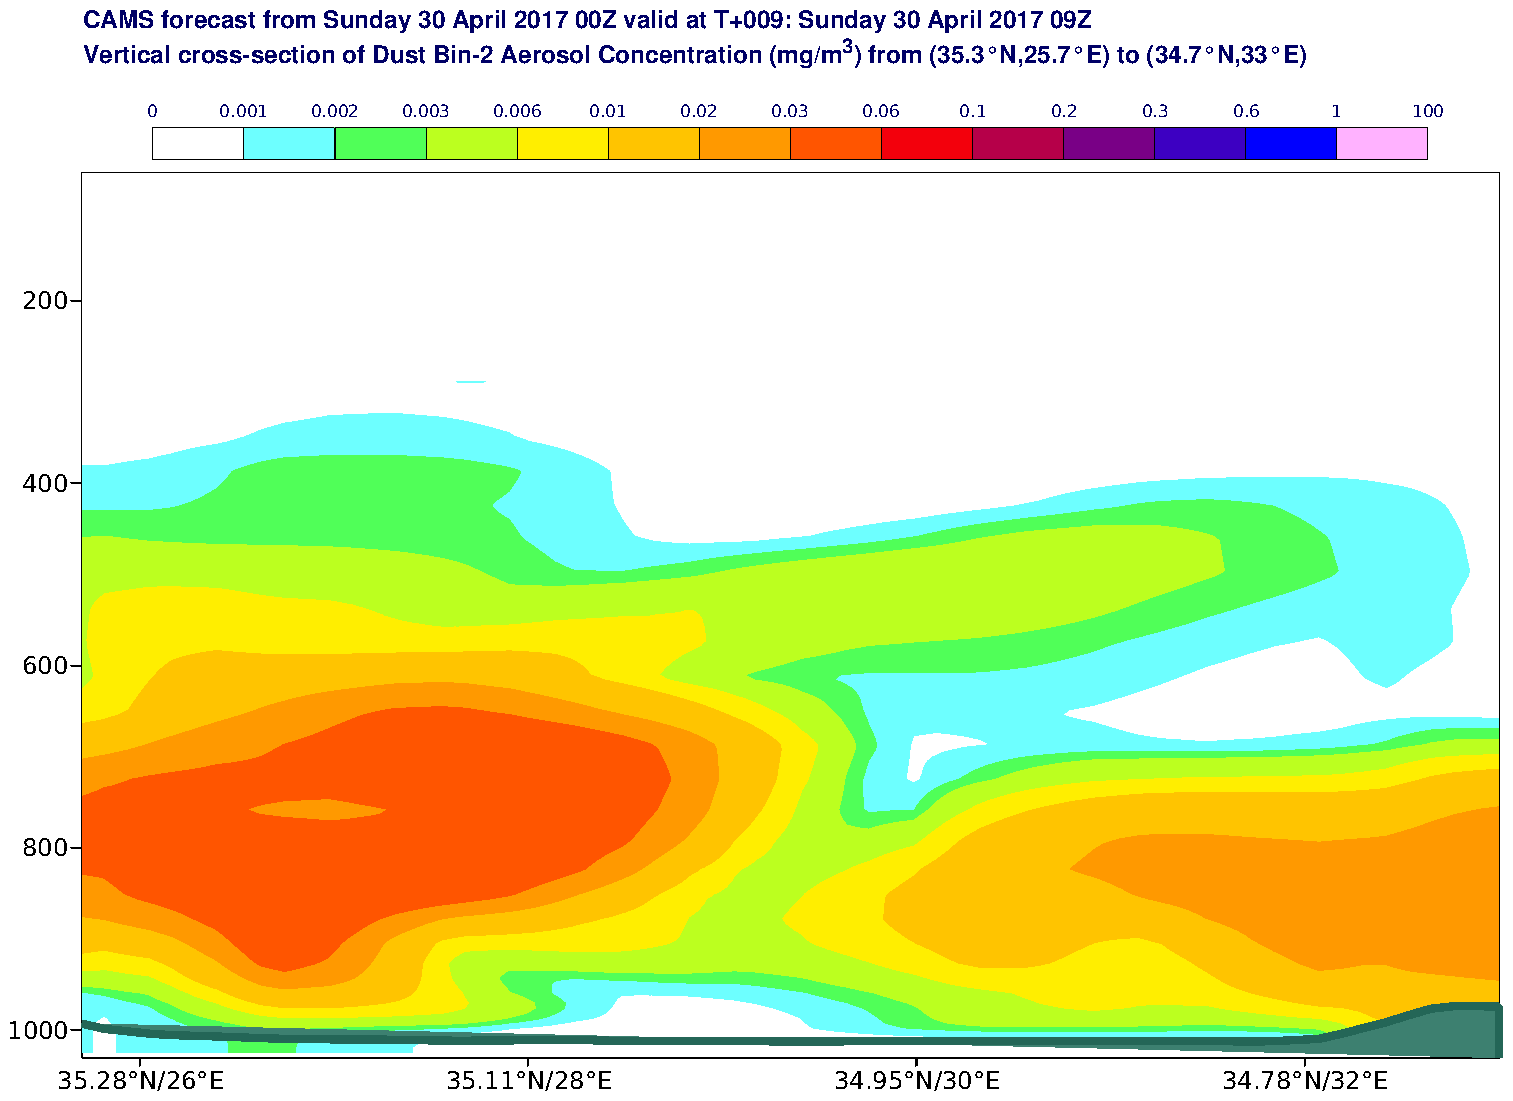 Vertical cross-section of Dust Bin-2 Aerosol Concentration (mg/m3) valid at T9 - 2017-04-30 09:00